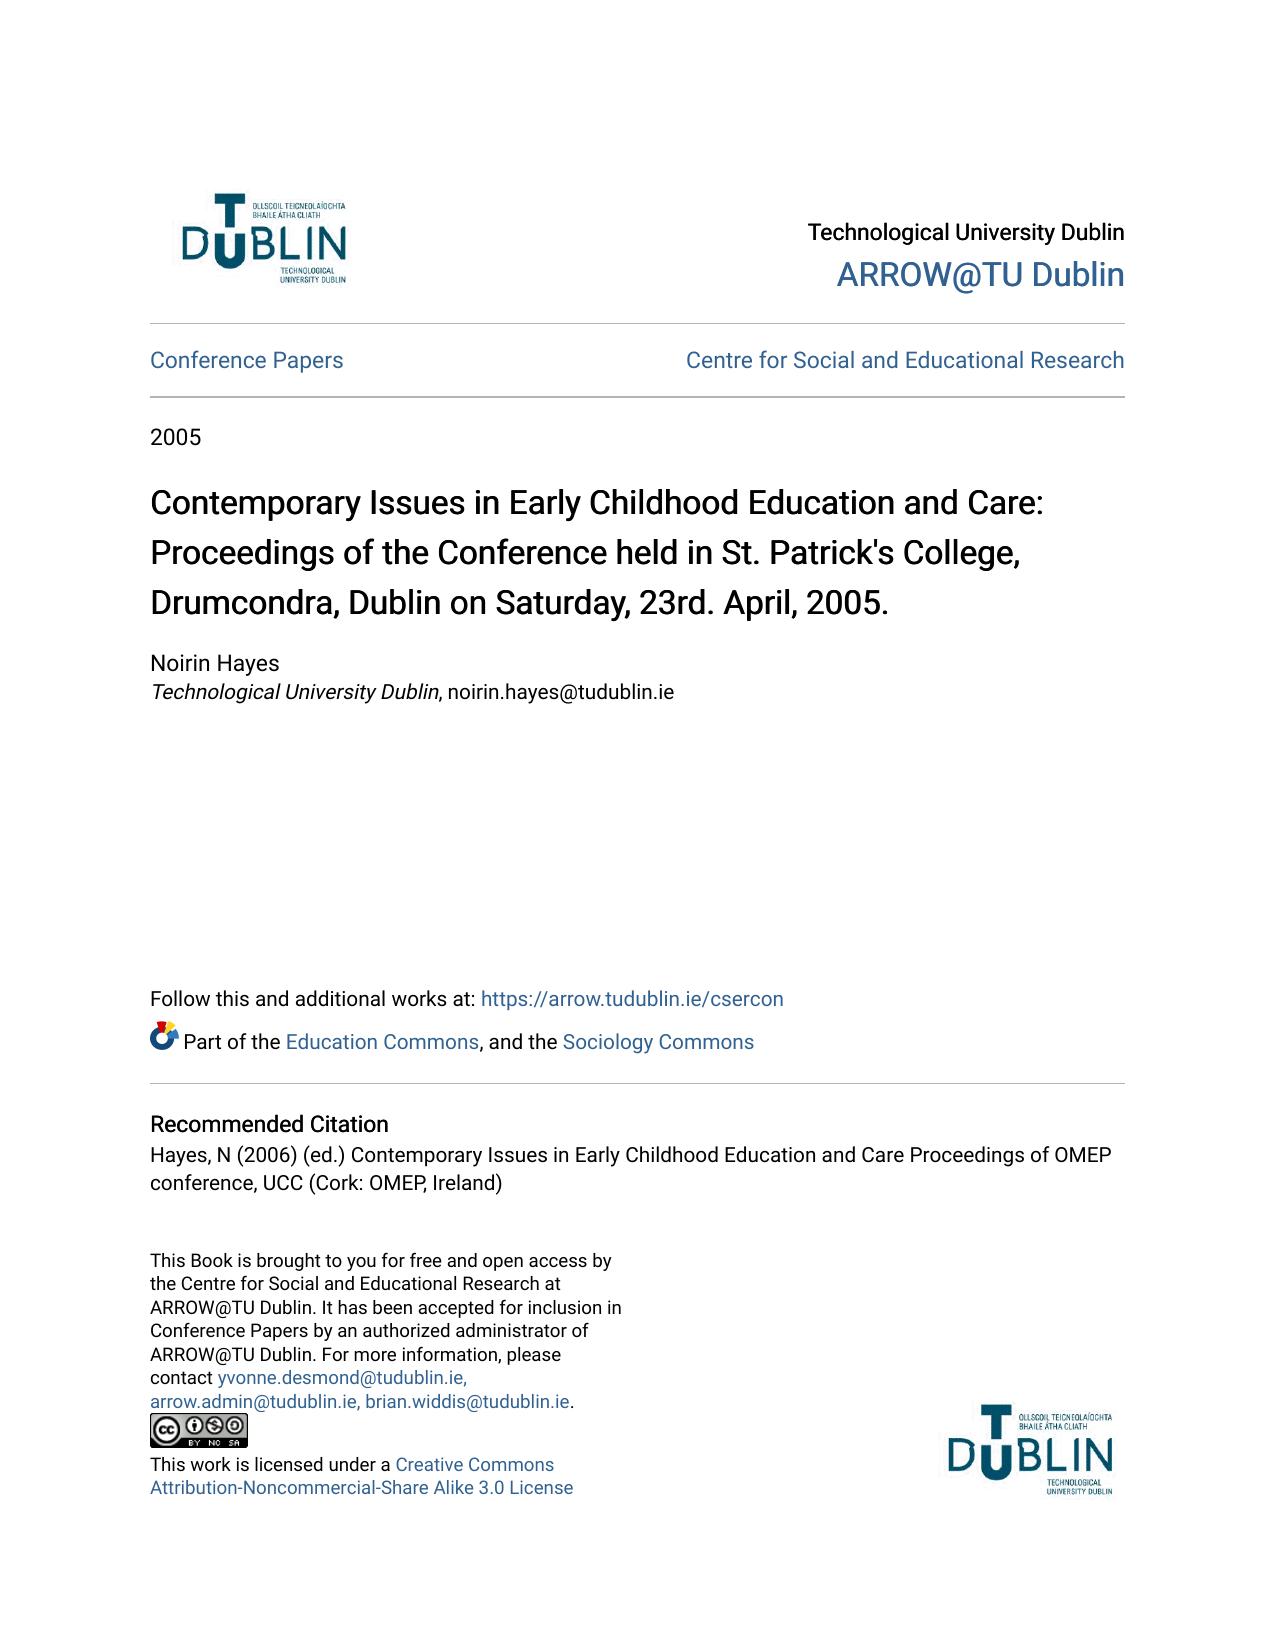 Contemporary Issues in Early Childhood Education and Care: Proceedings of the Conference held in St. Patrick's College, Drumcondra, Dublin on Saturday, 23rd. April, 2005.